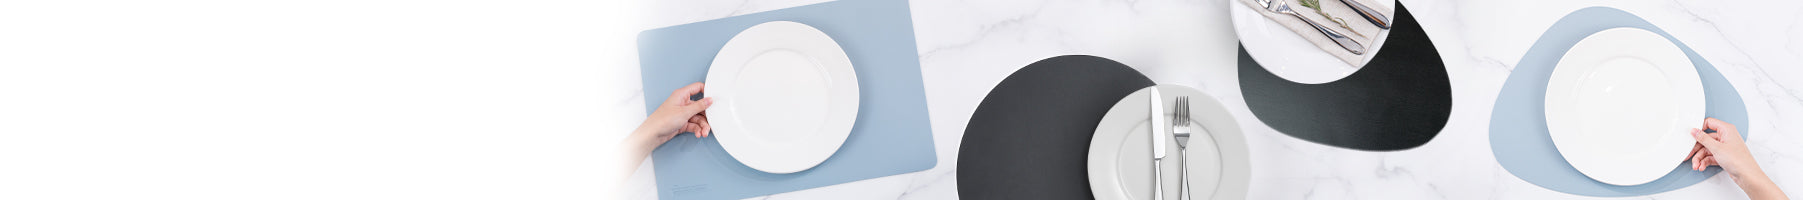 Banner_Tableware_Placemats_306